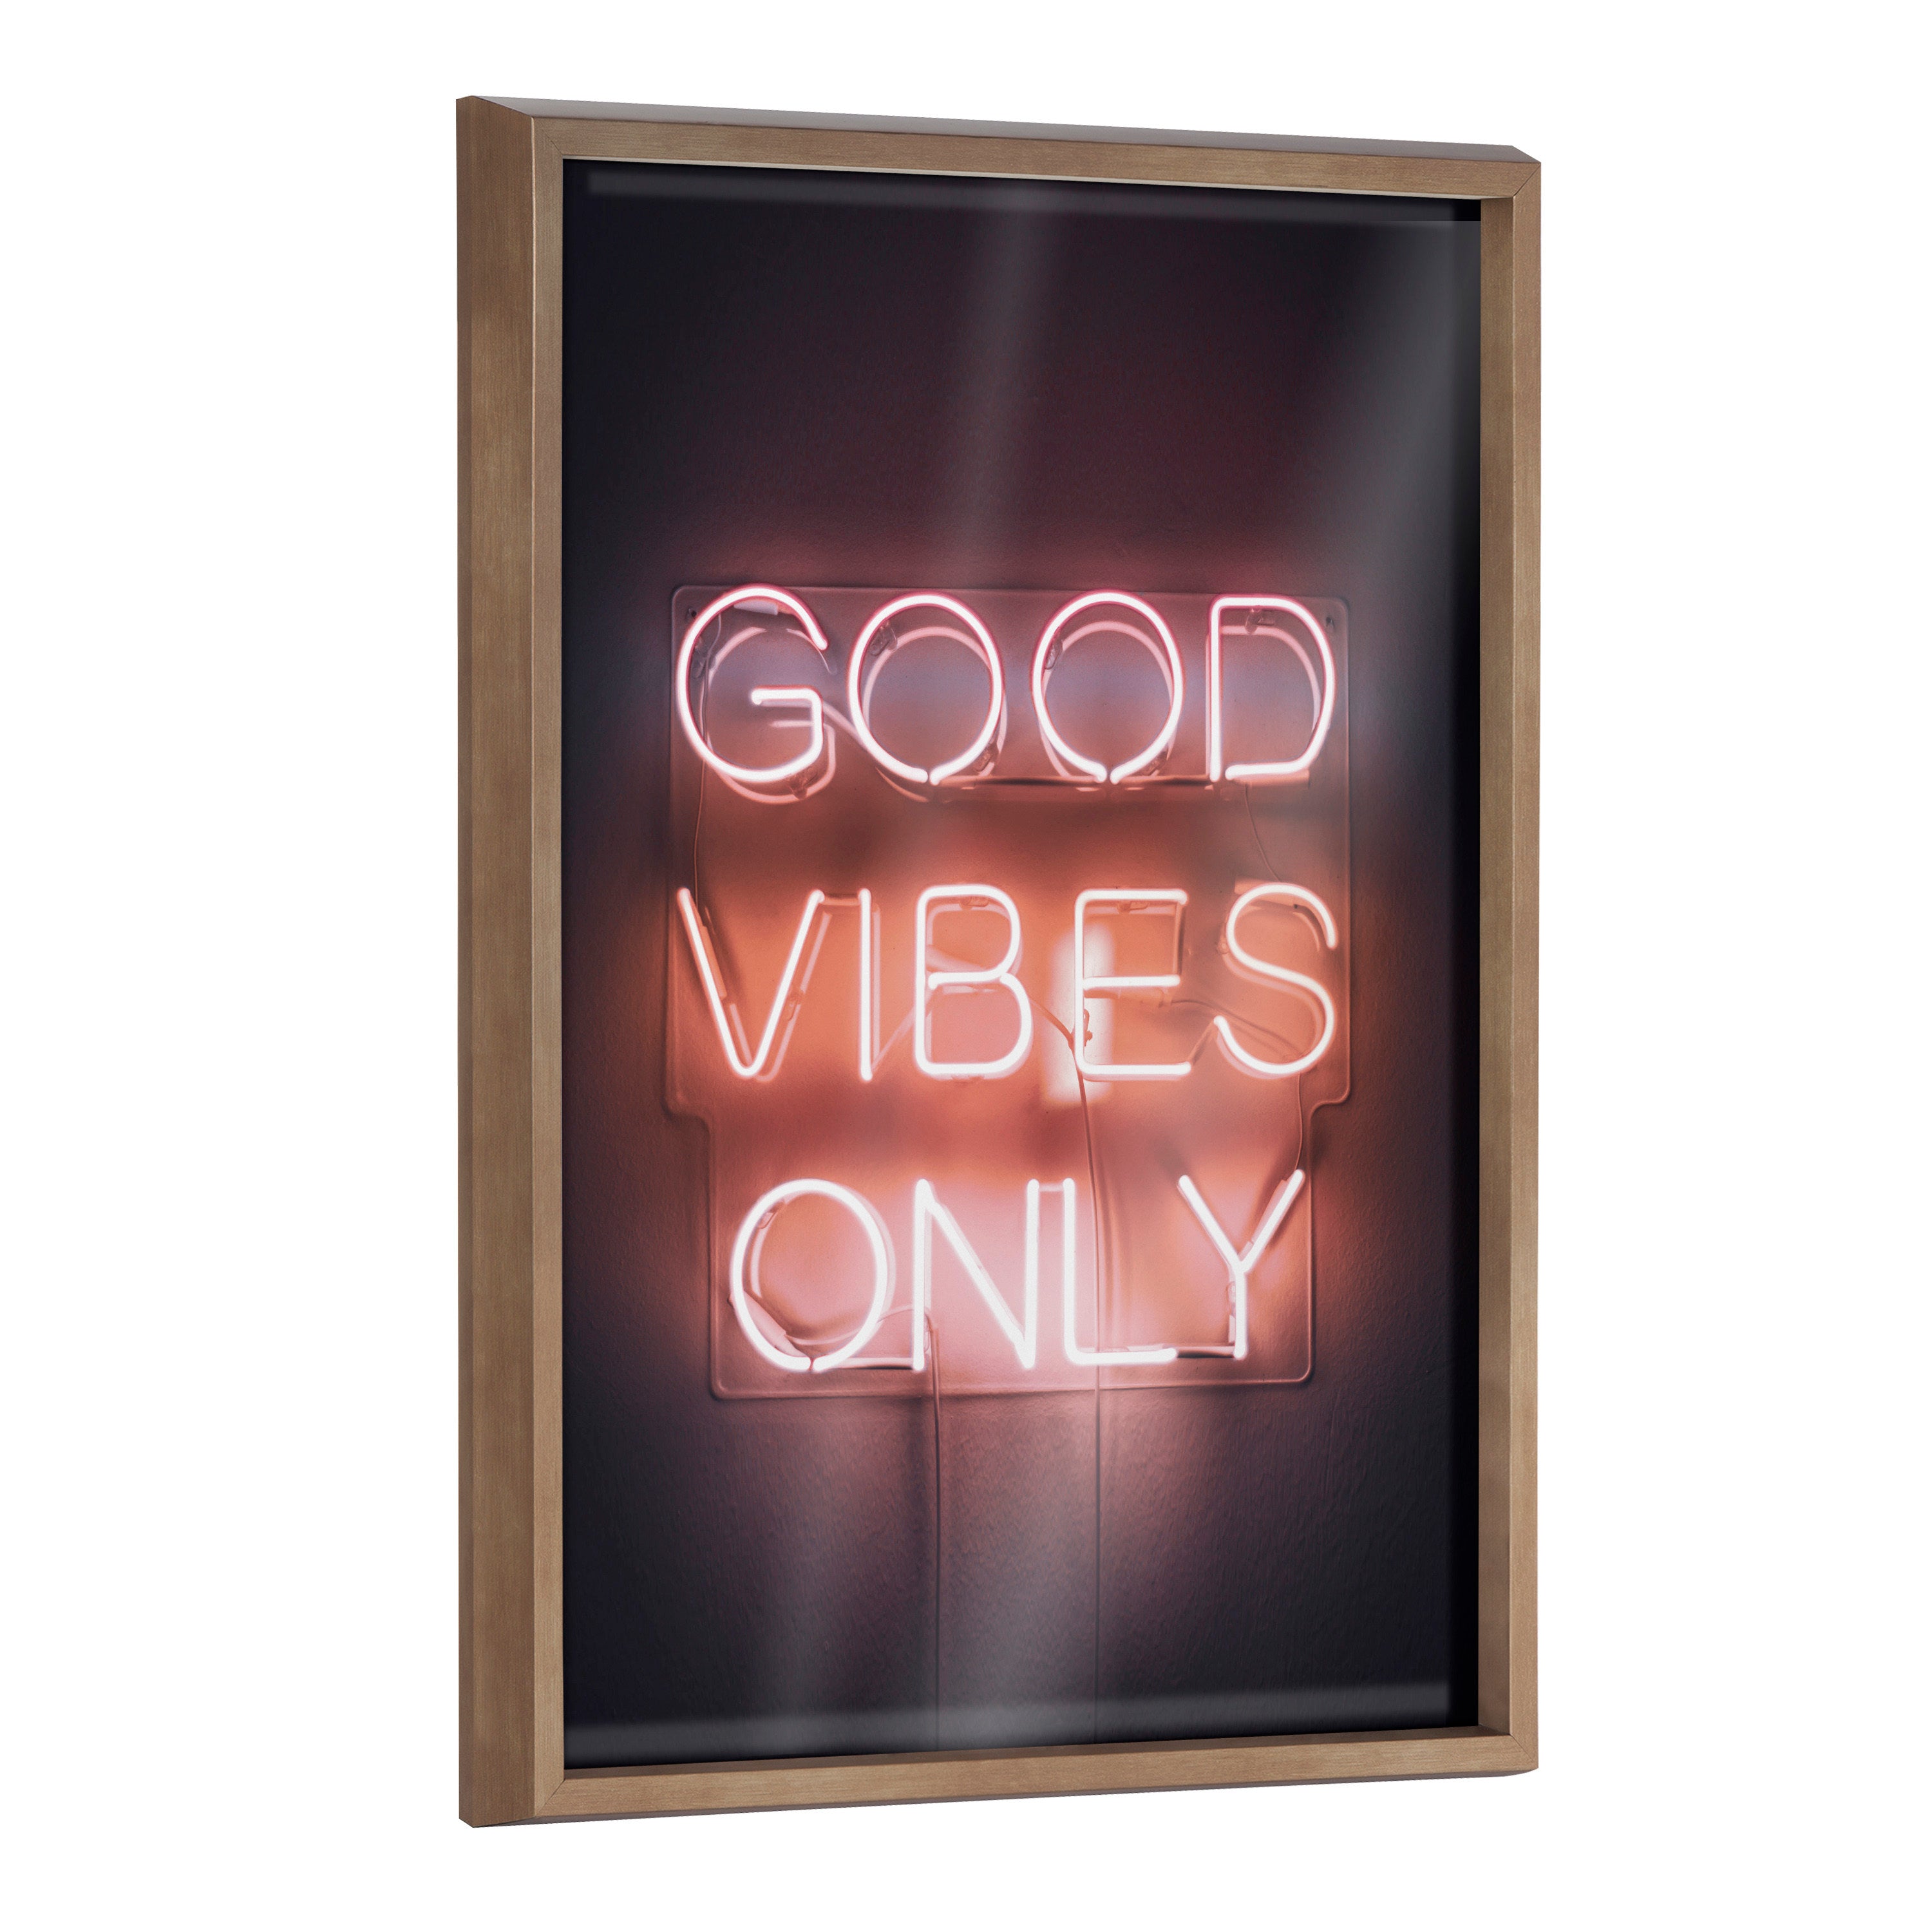 Blake Good Vibes Only Neon Sign Framed Printed Glass by The Creative Bunch Studio